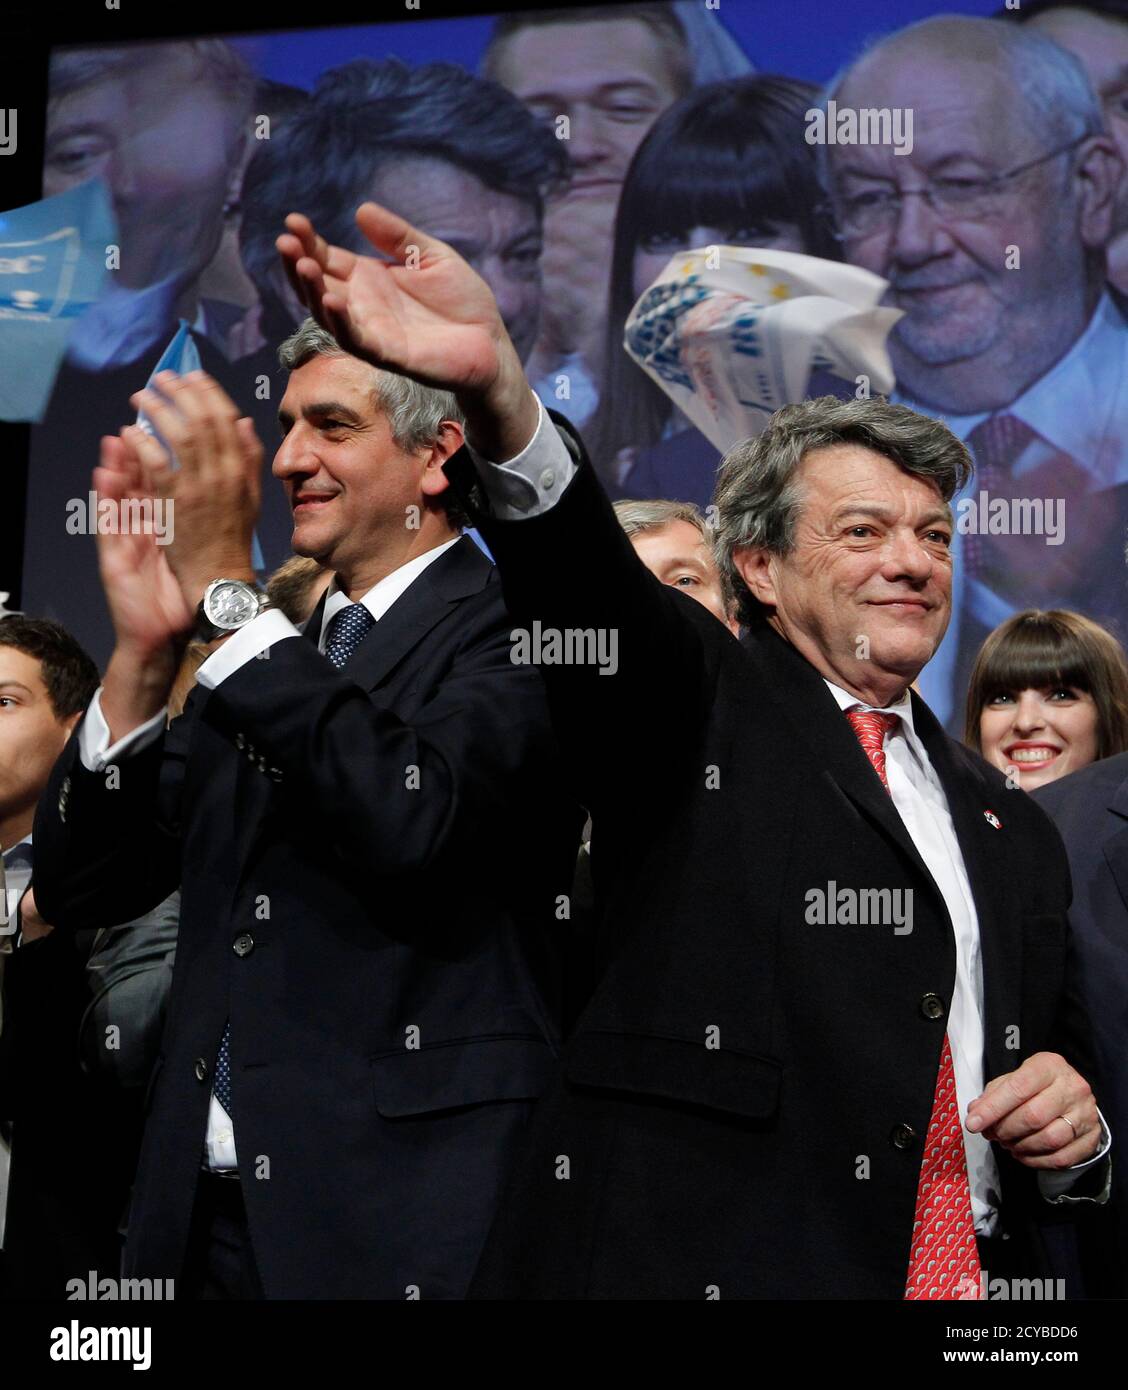 Jean-Louis Borloo (R), French deputy and President of the French Radical  Party, waves to supporteres as he stands by former Defense minister Herve  Morin (L) after a two-day congress of his party